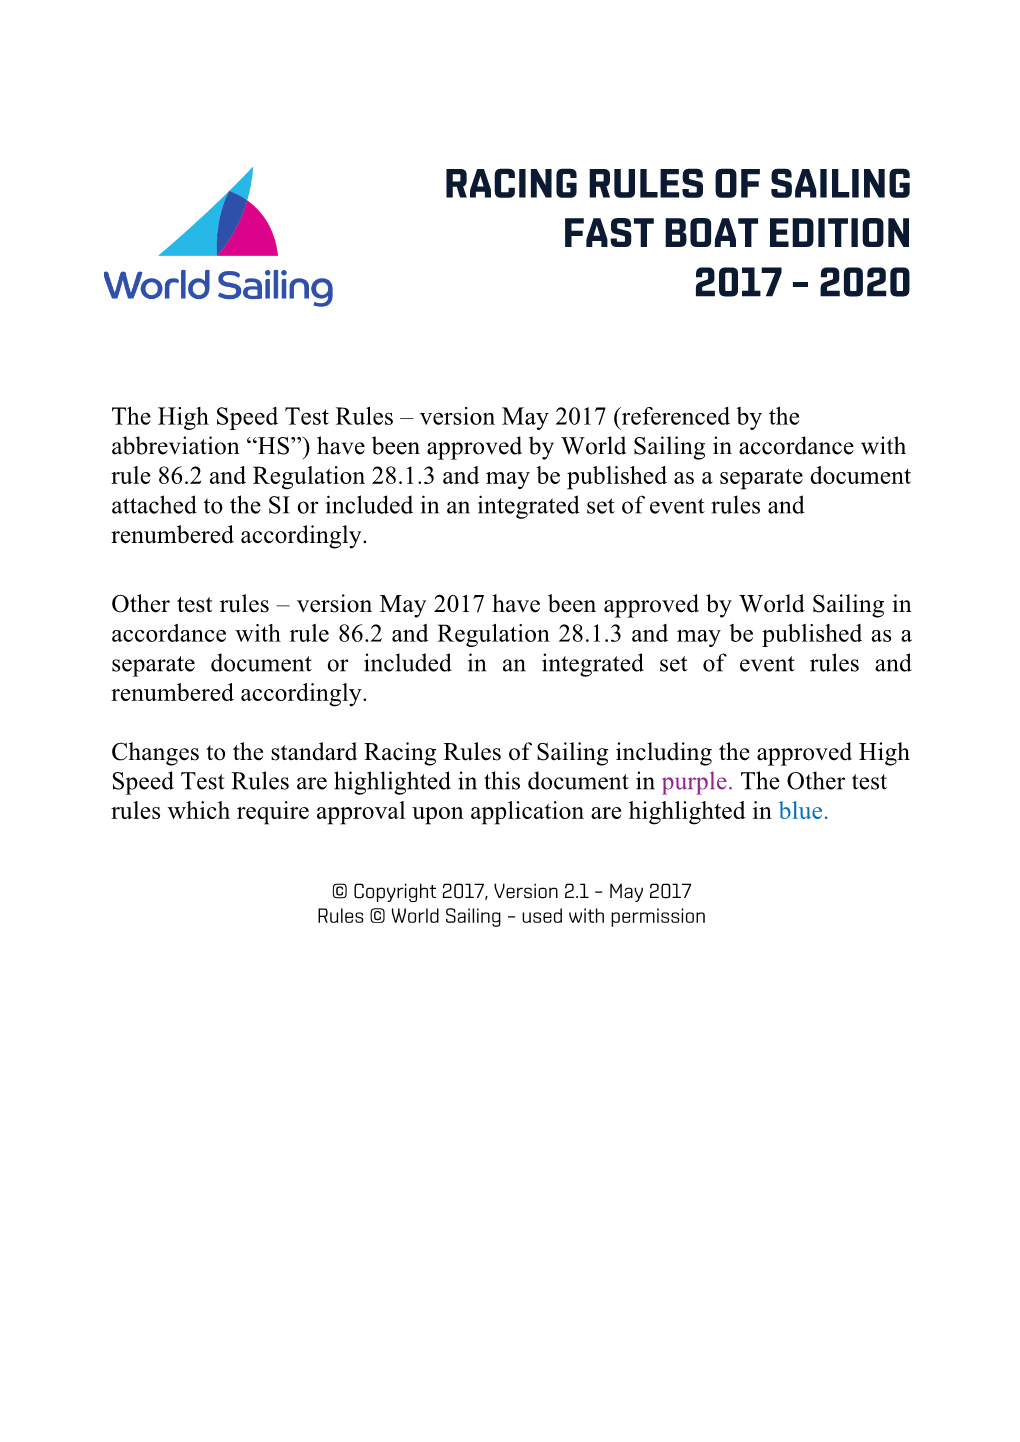 Racing Rules of Sailing Fast Boat Edition 2017 – 2020